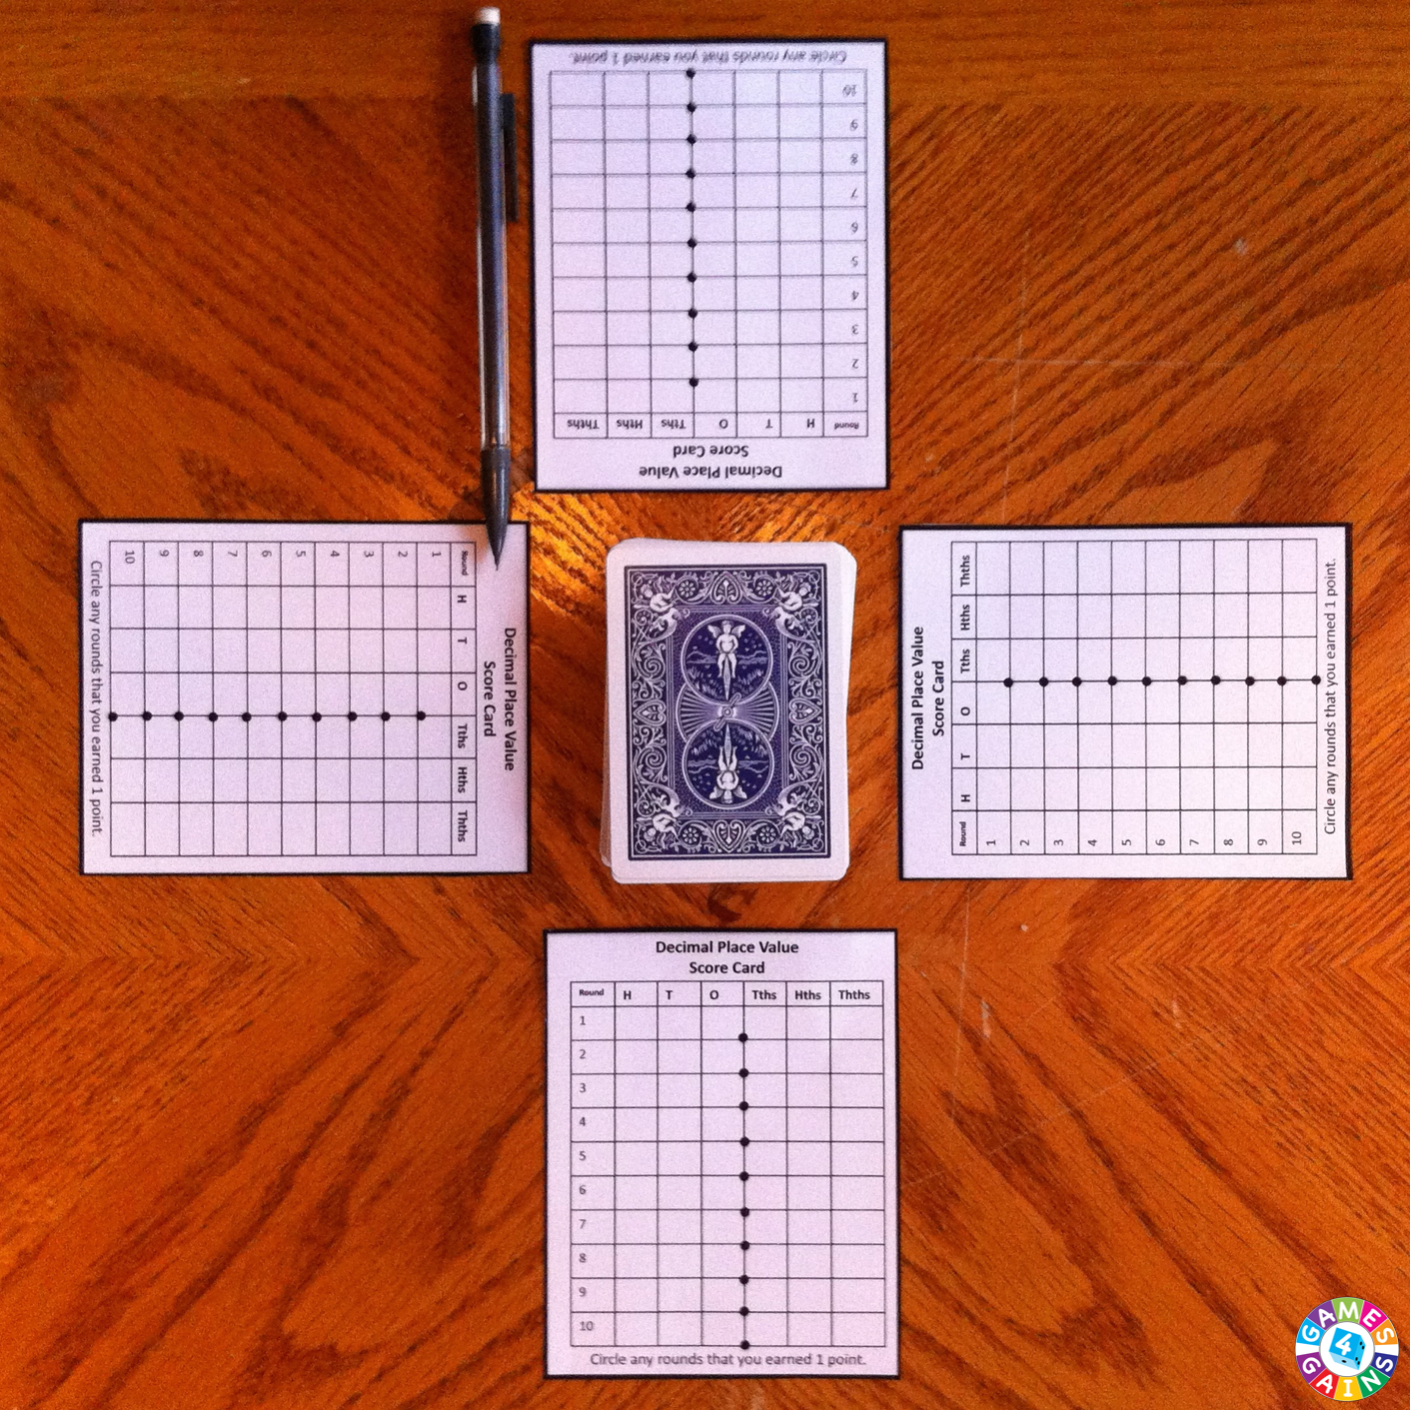 Decimal Place Value With Playing Cards! – Games 4 Gains